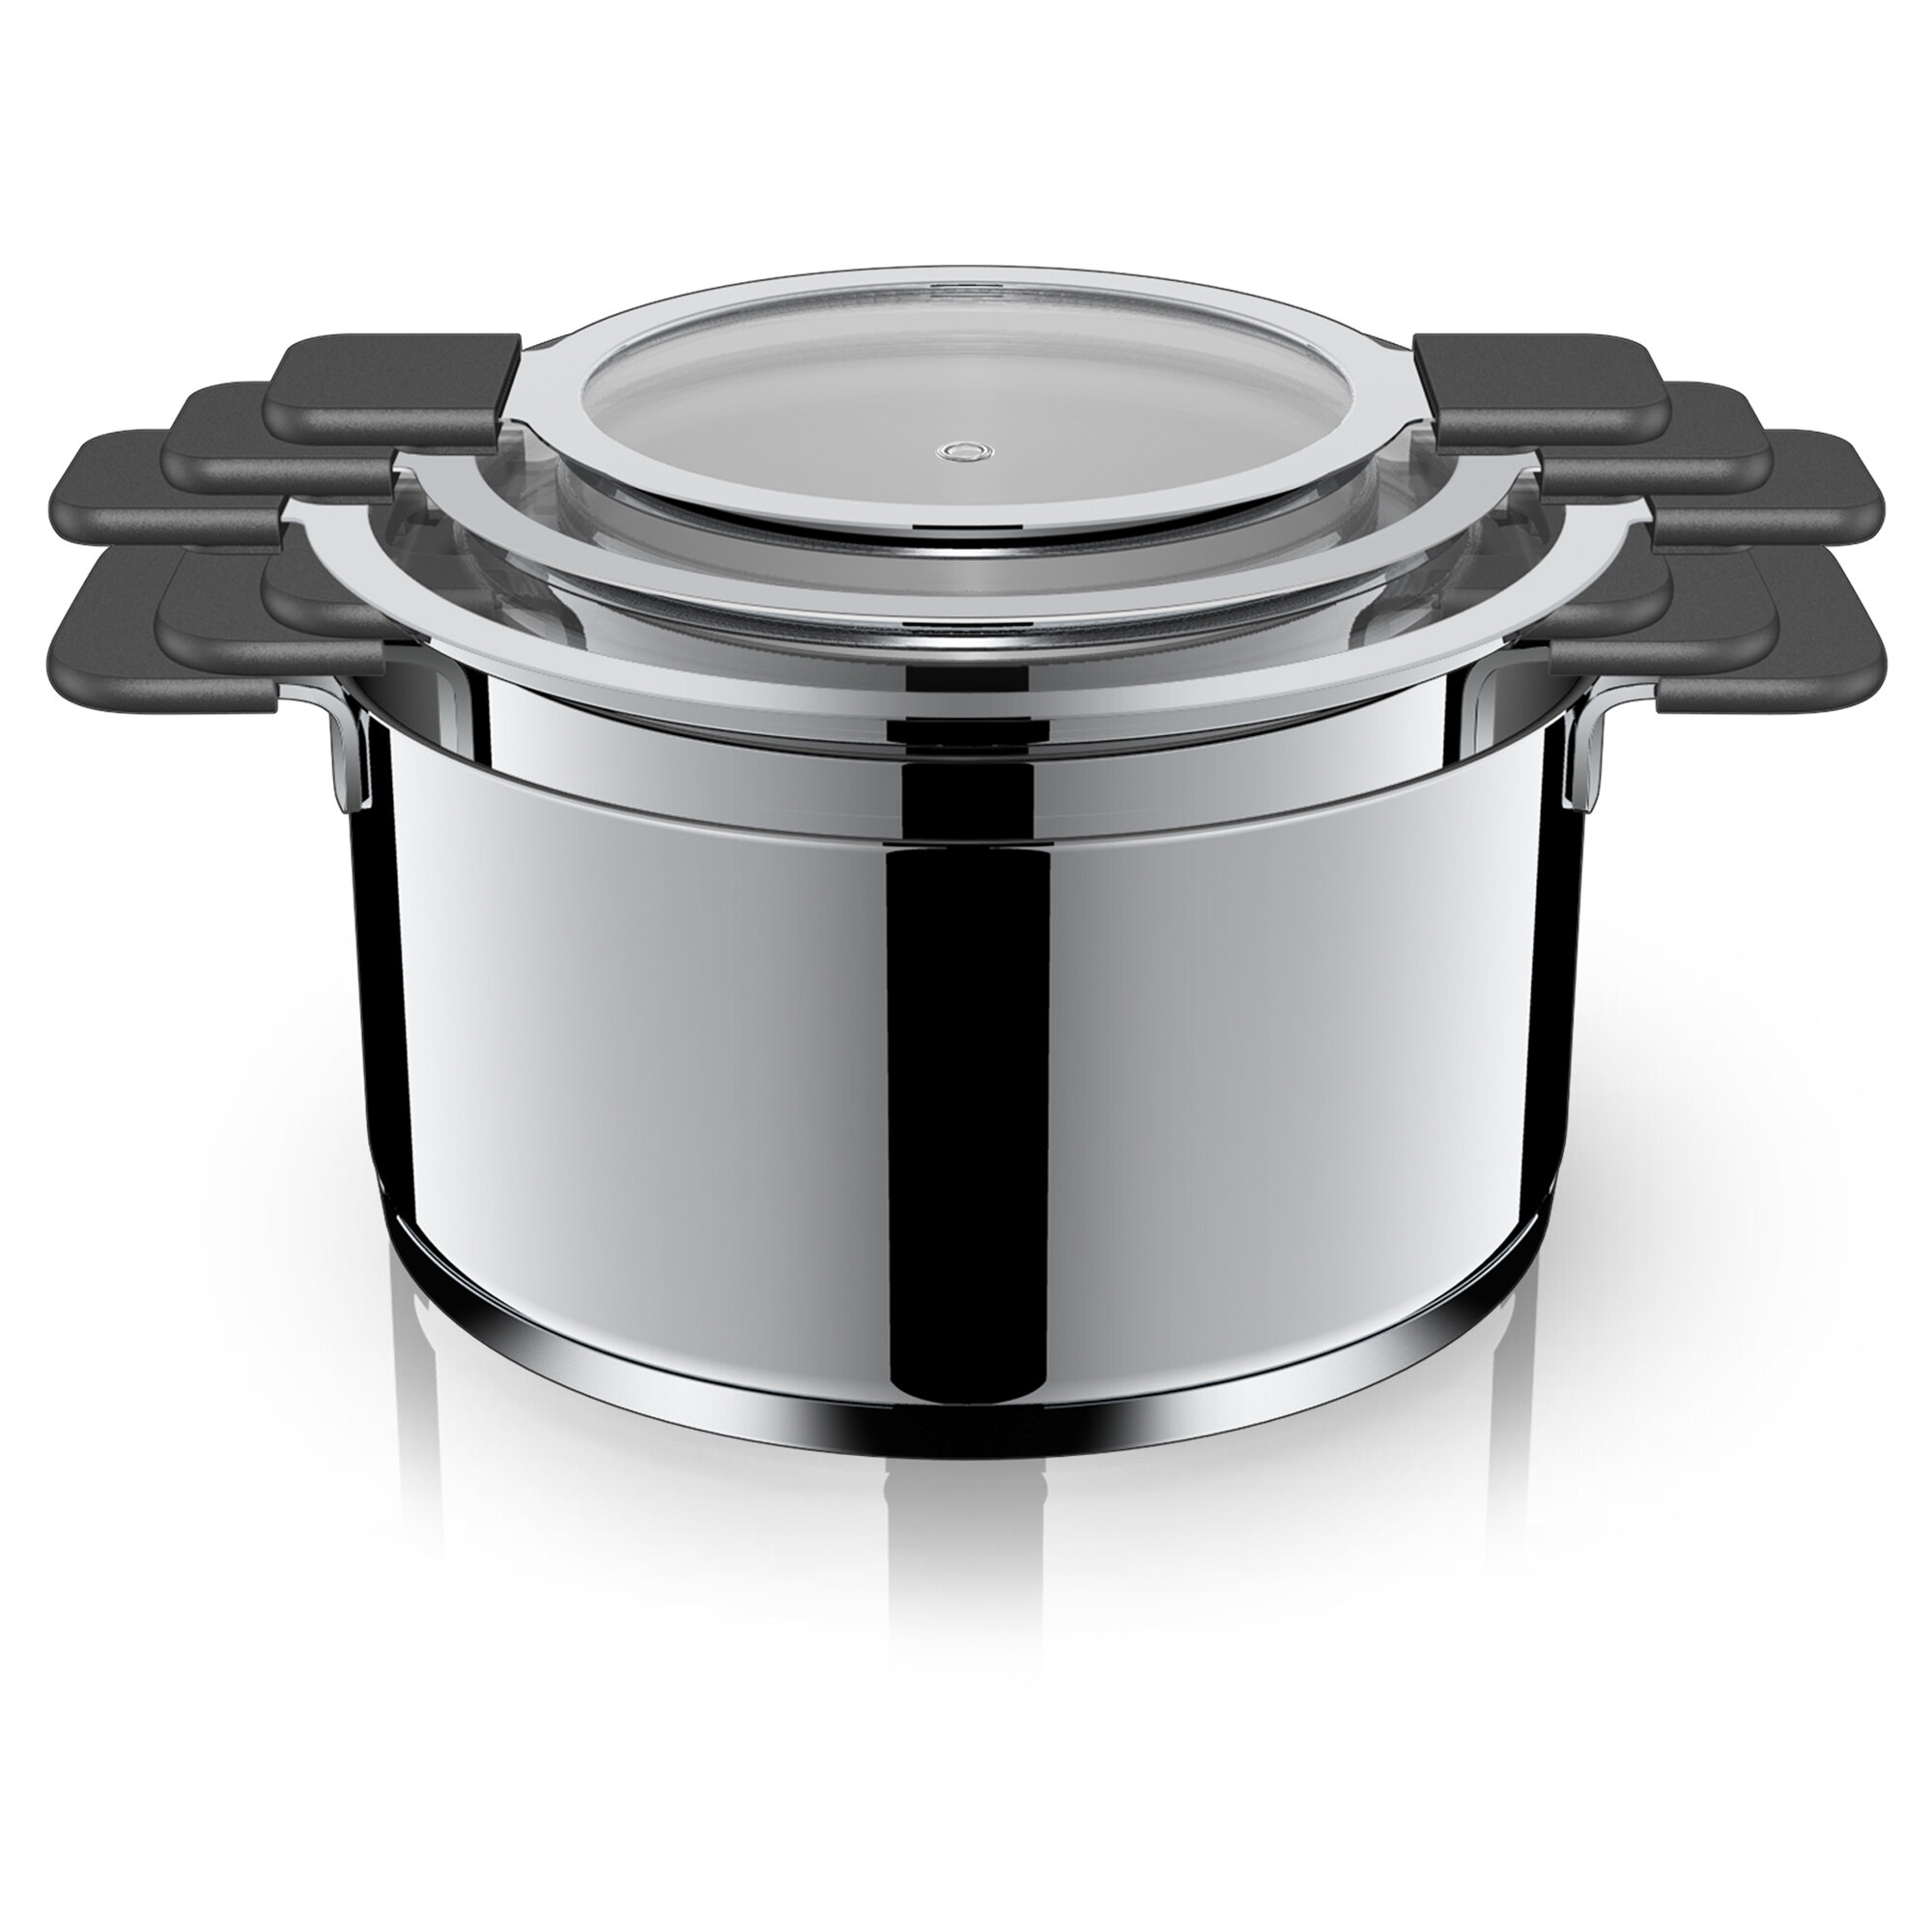  12 Stainless Steel Pan by Ozeri with ETERNA, a 100